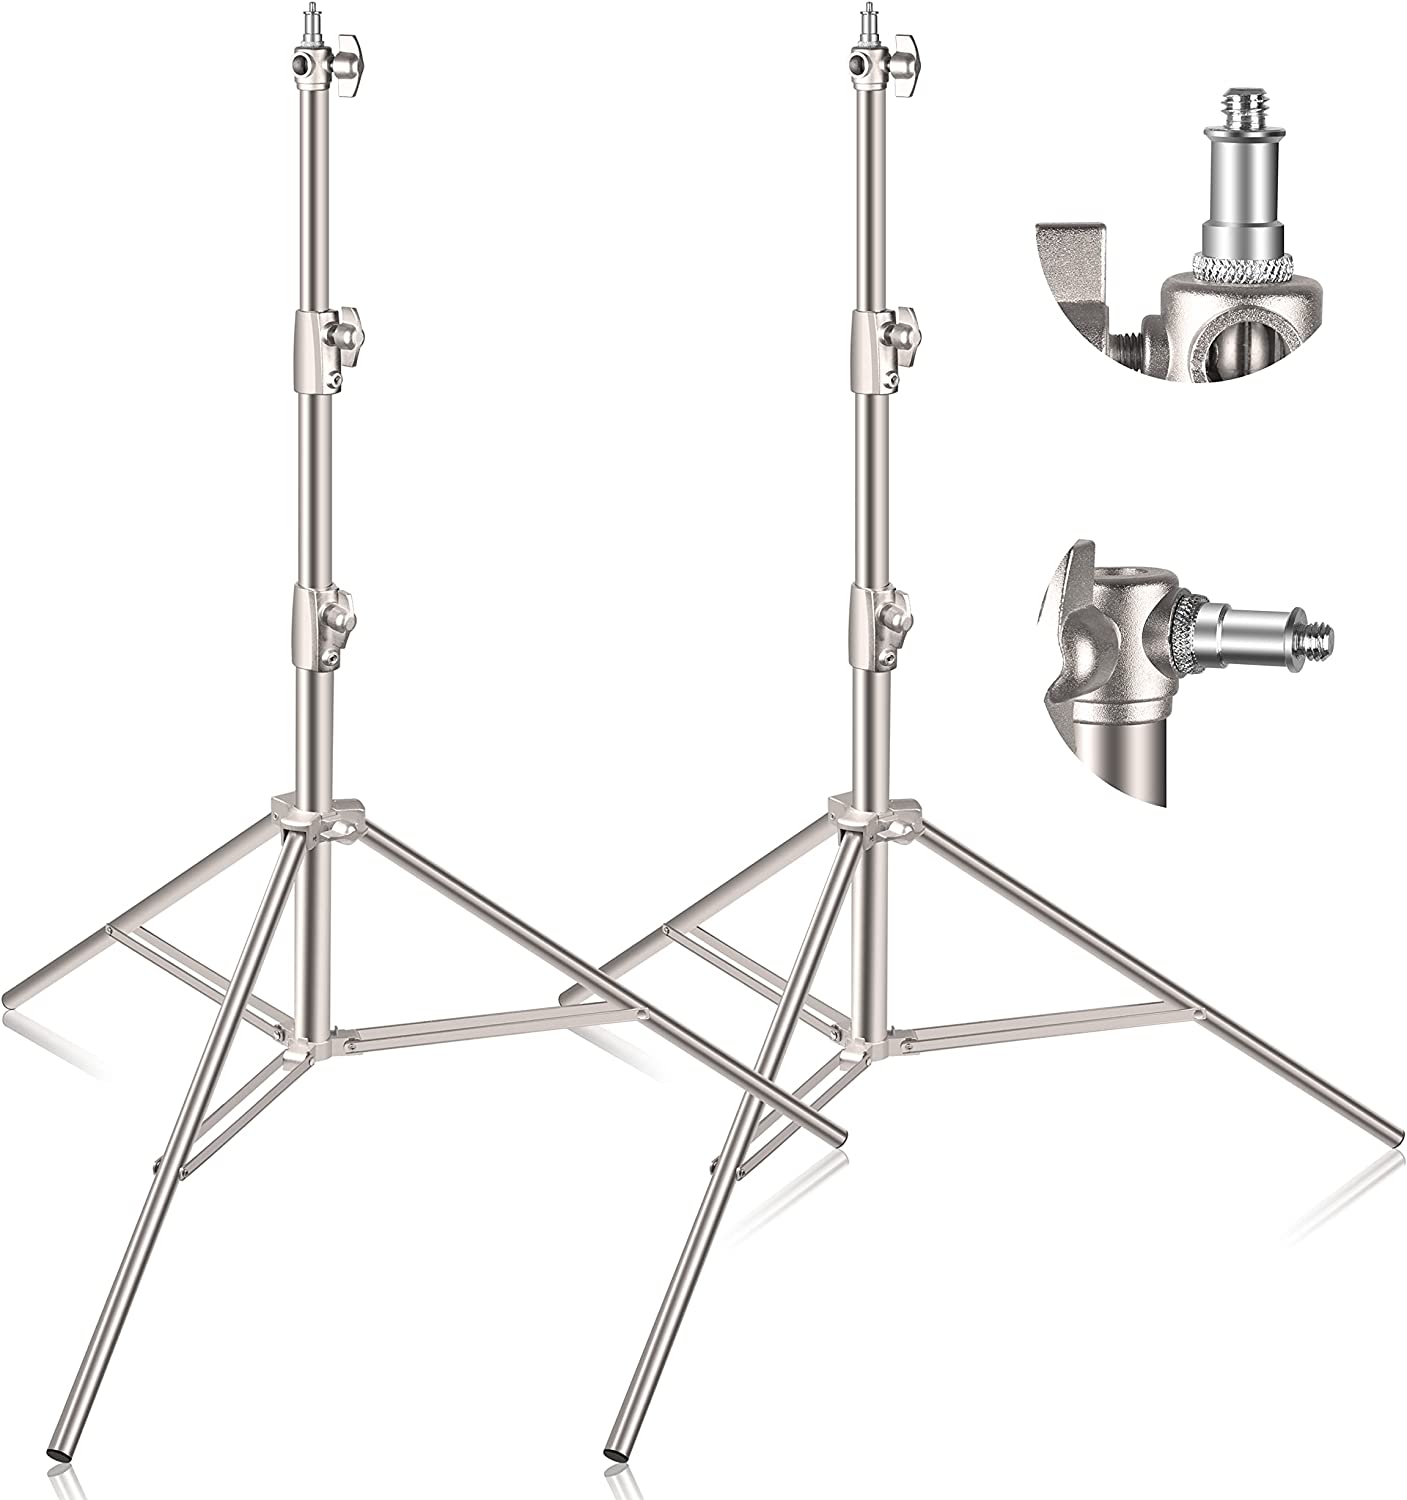 9.2ft/2.8m Stainless Steel Light Stand- 2 Pack